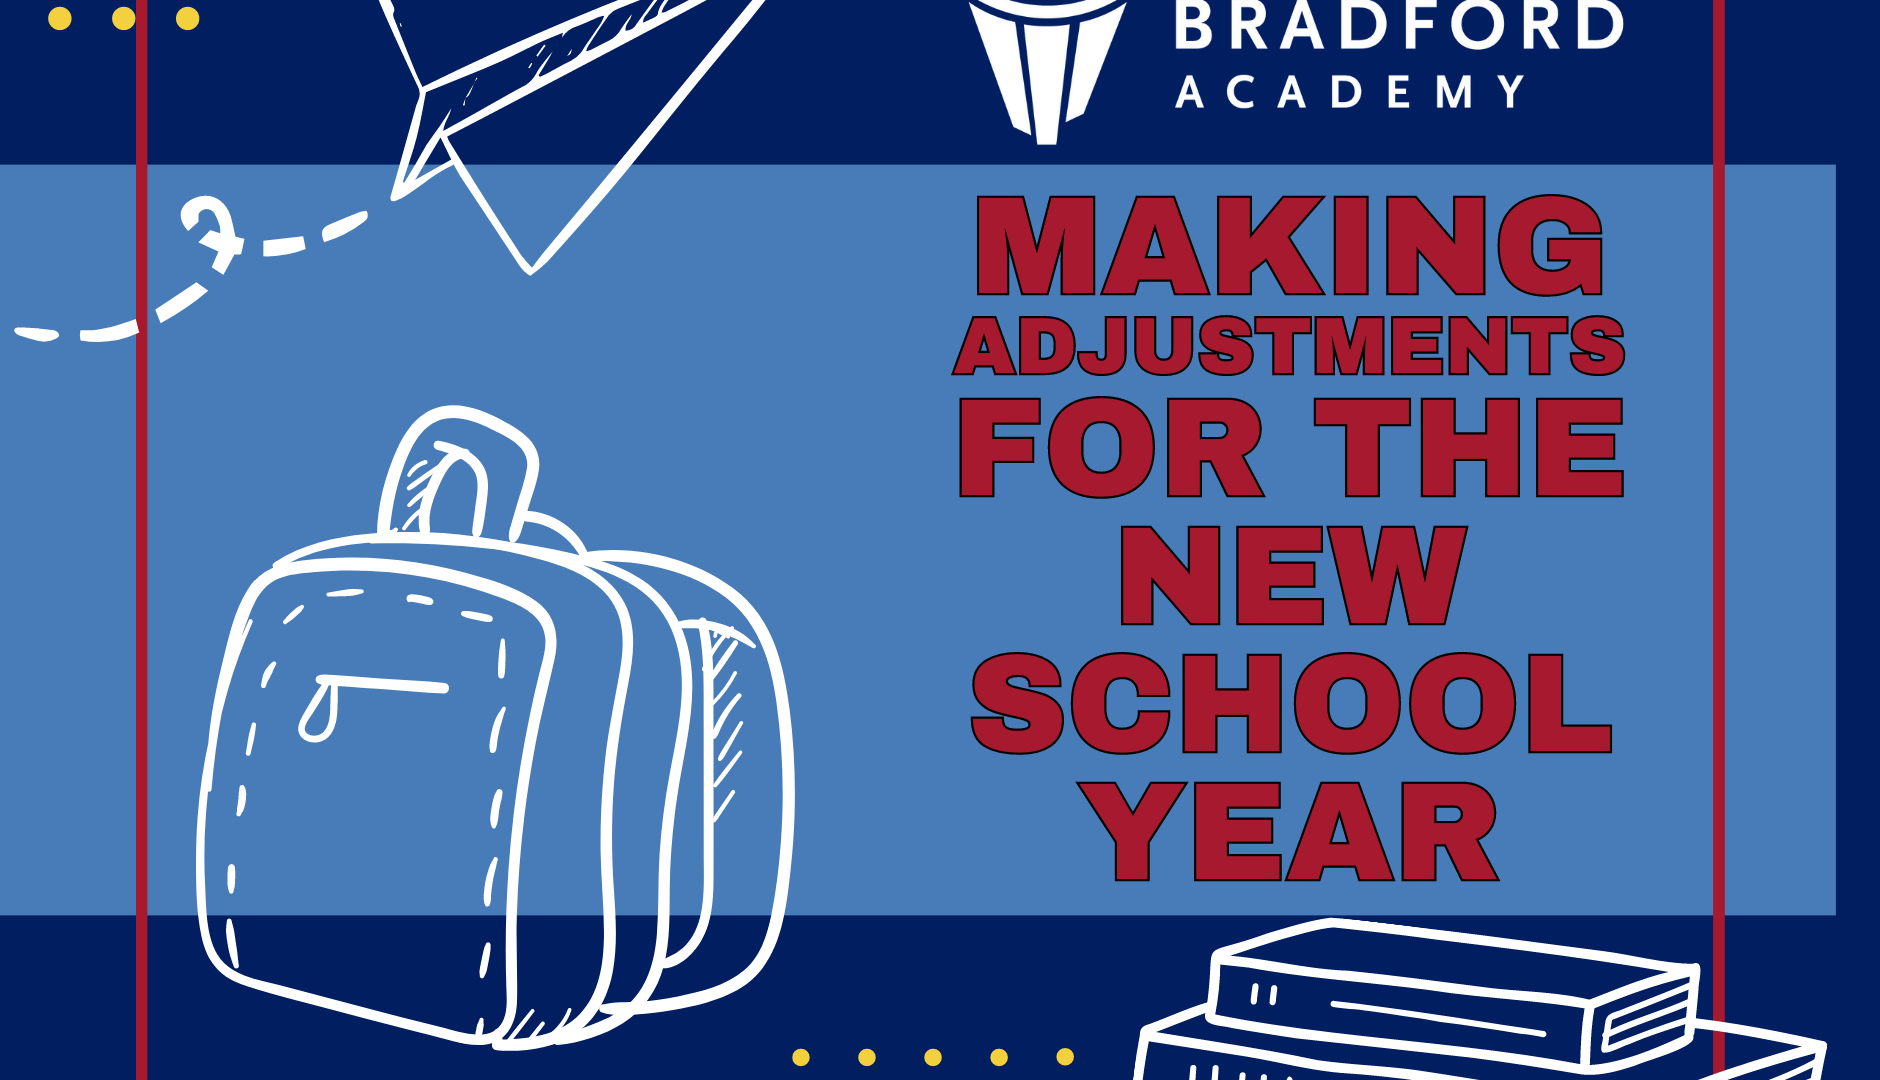 Making adjustments for the new school year at Bradford Academy, decorative blog image